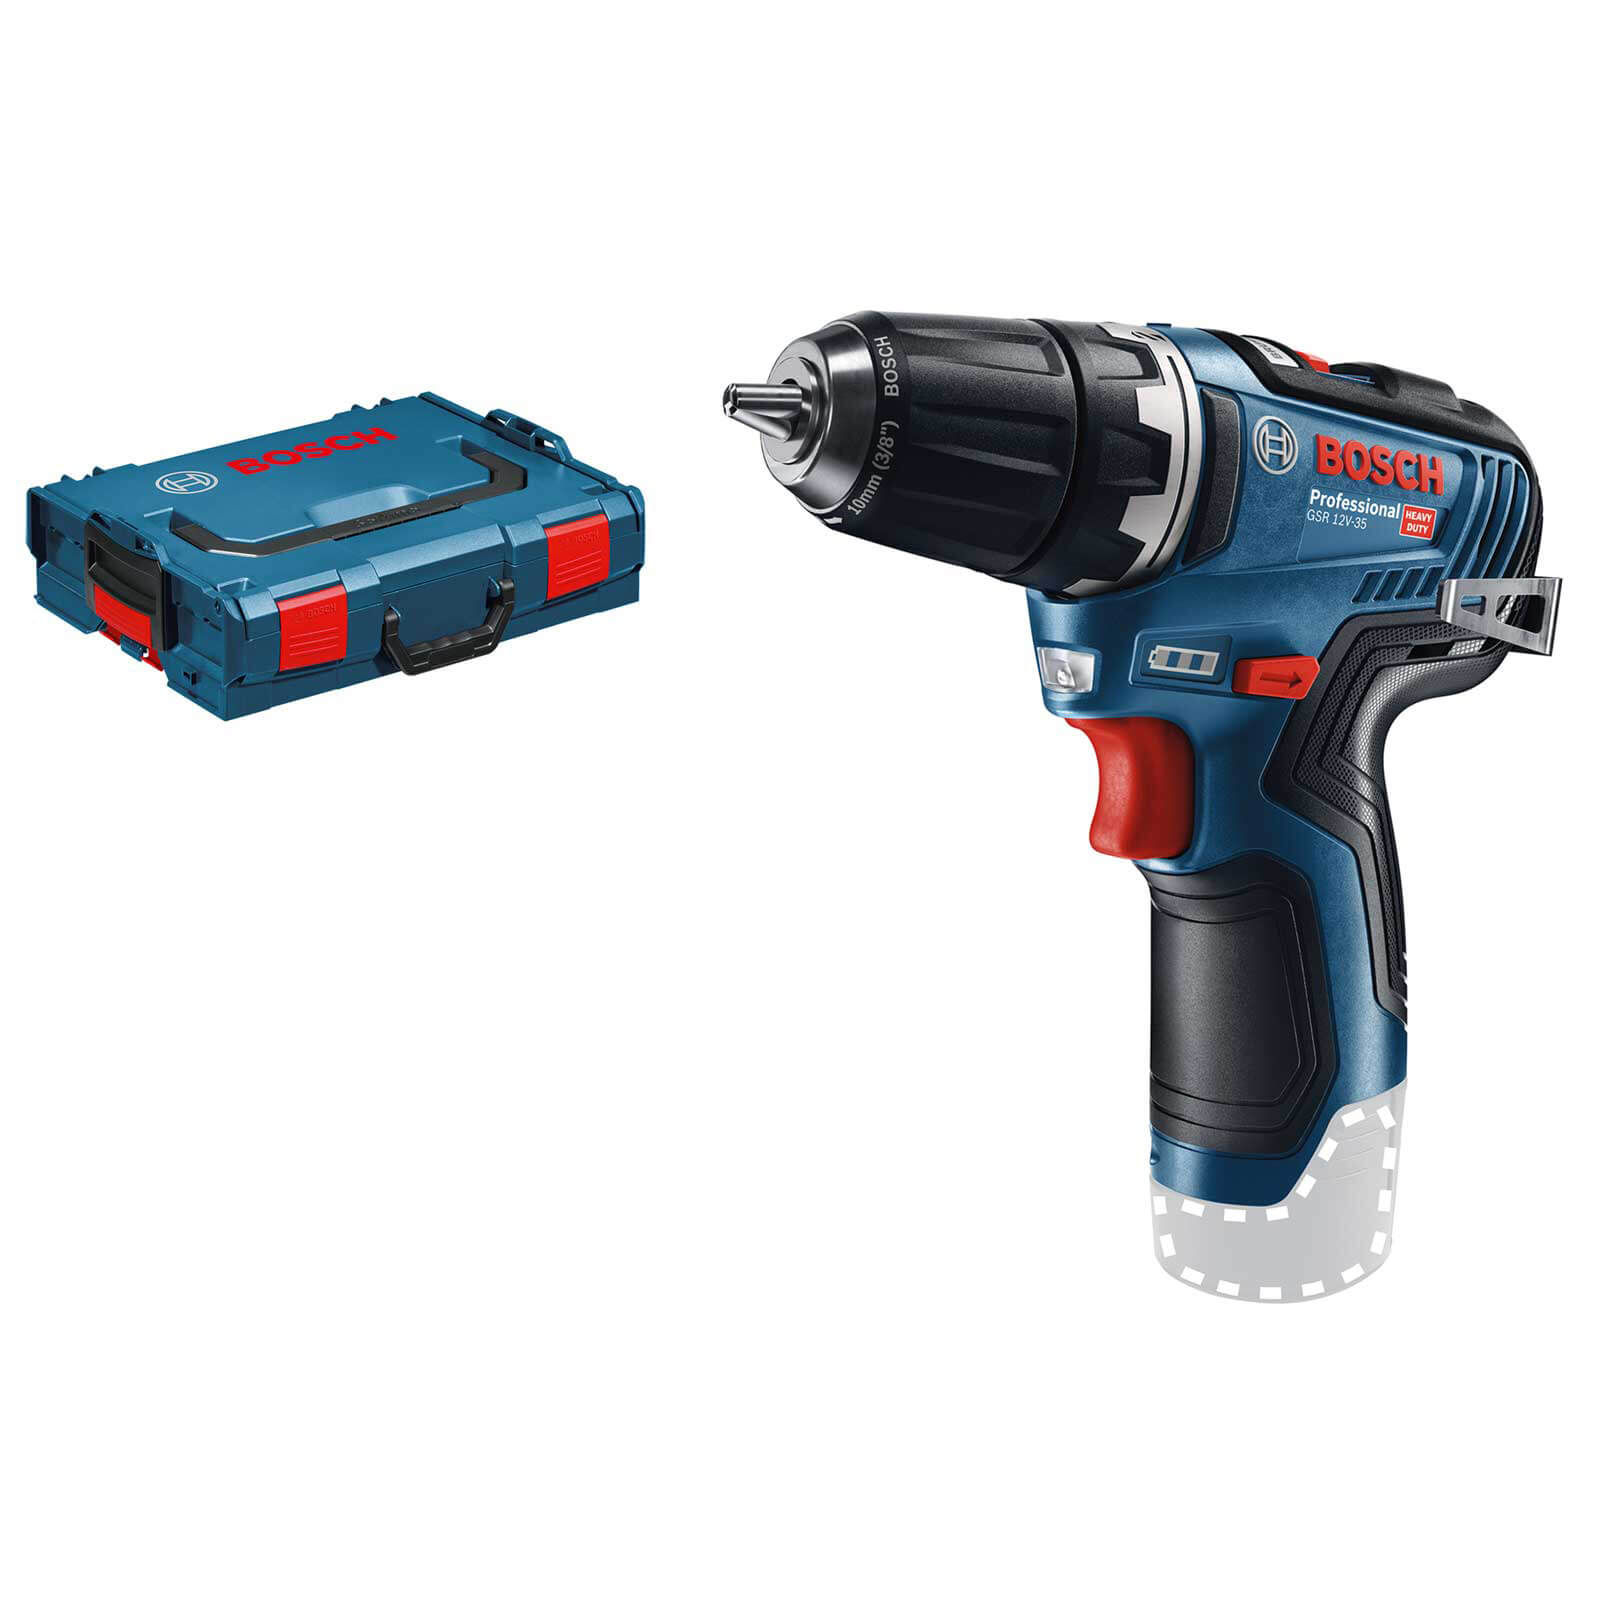 Image of Bosch GSR 12V-35 12v Cordless Brushless Drill Driver No Batteries No Charger Case